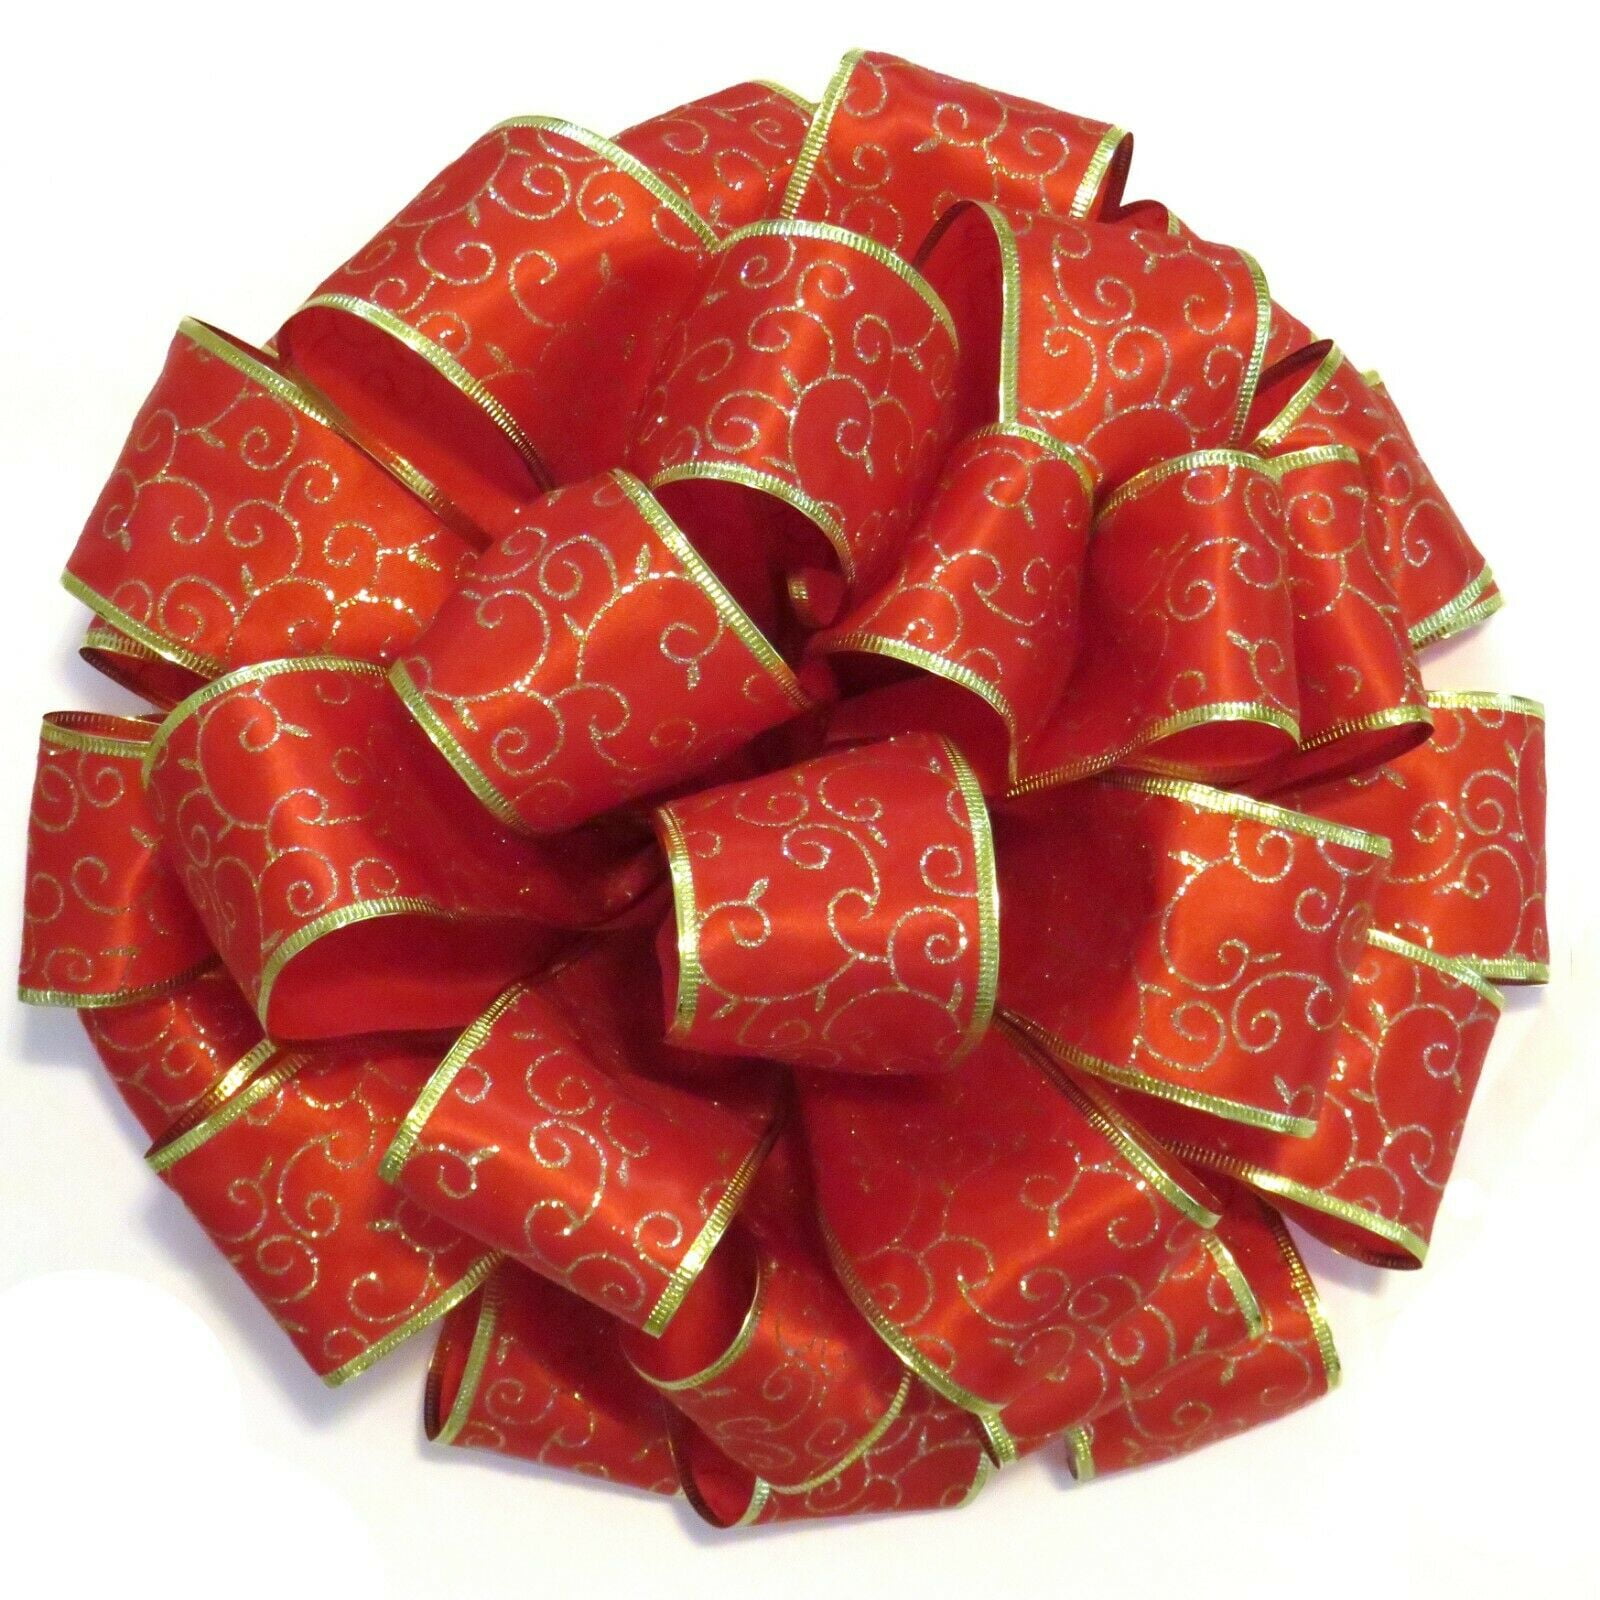 Satin Valentine Hearts Wired Ribbon - 2 1/2 x 10 Yards, White Hearts, Red  Wired Edges, Christmas, Valentine's Day Décor, Gift Wrap, IGift Bow,  Bouquet, Gift Basket 